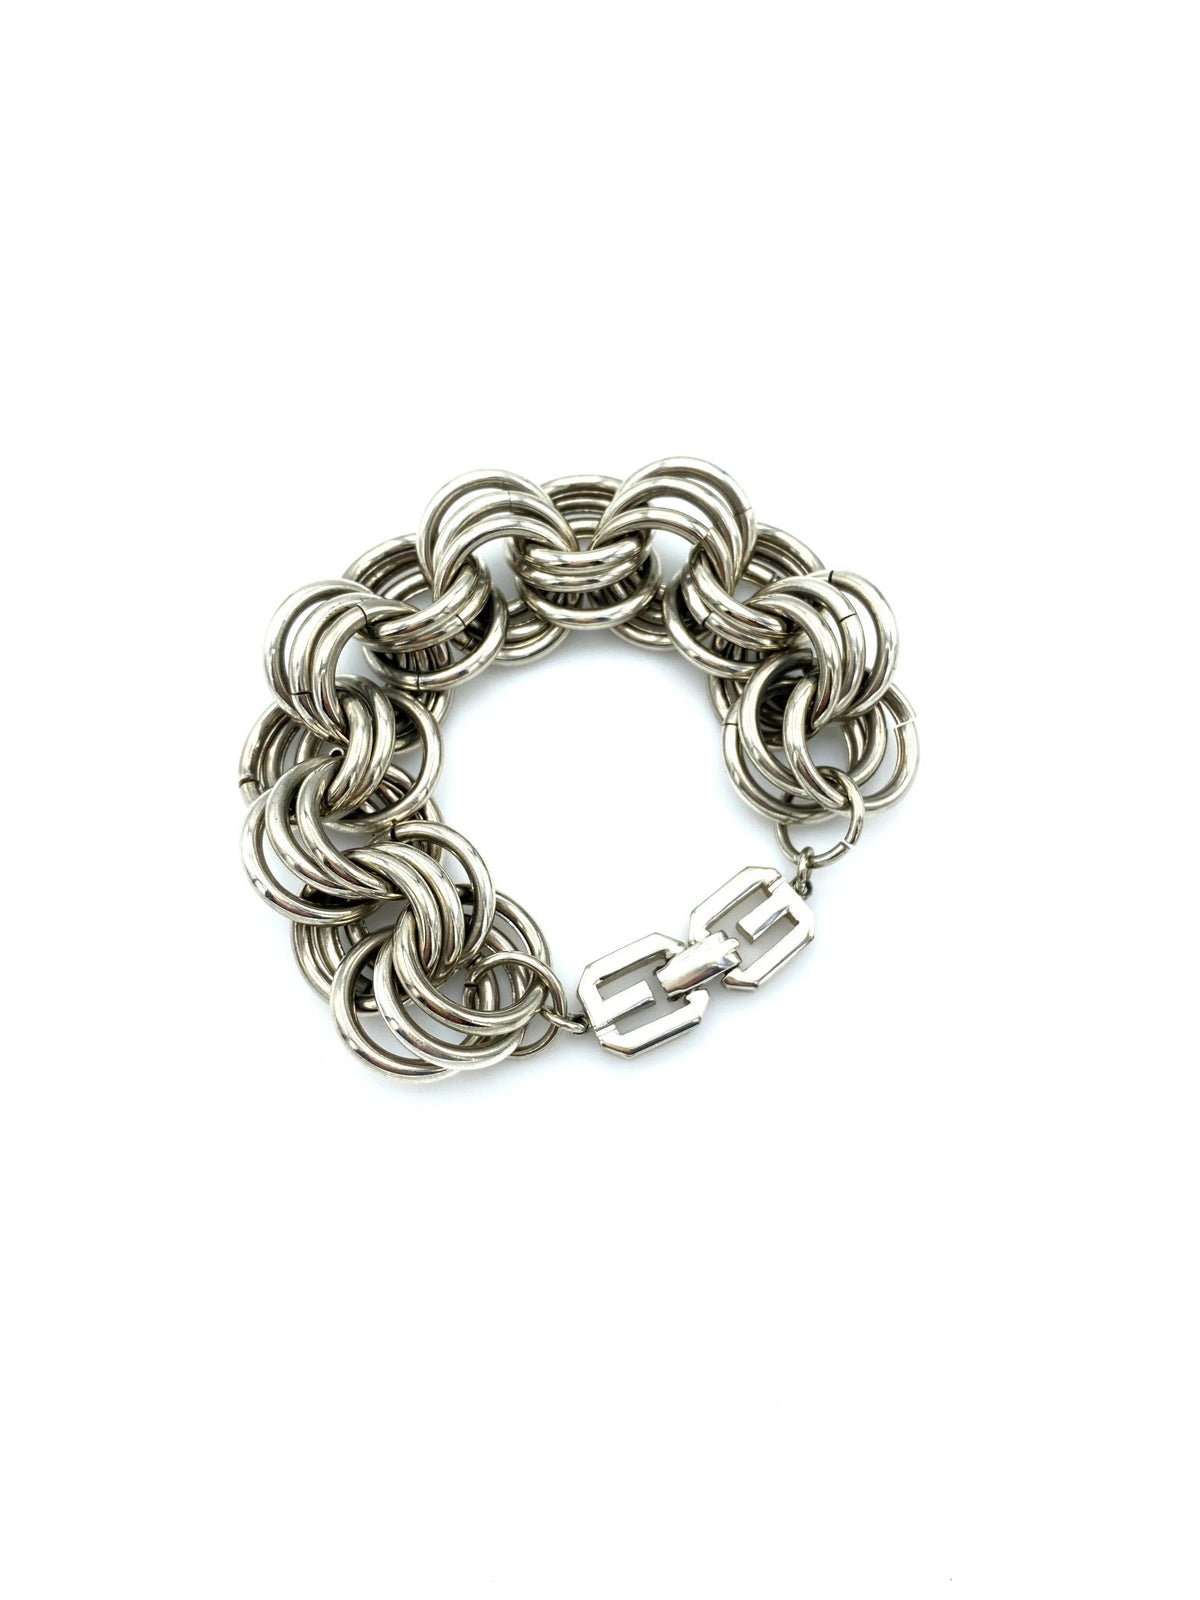 Givenchy Silver Three Link Stacking Chain Vintage Bracelet - 24 Wishes Vintage Jewelry